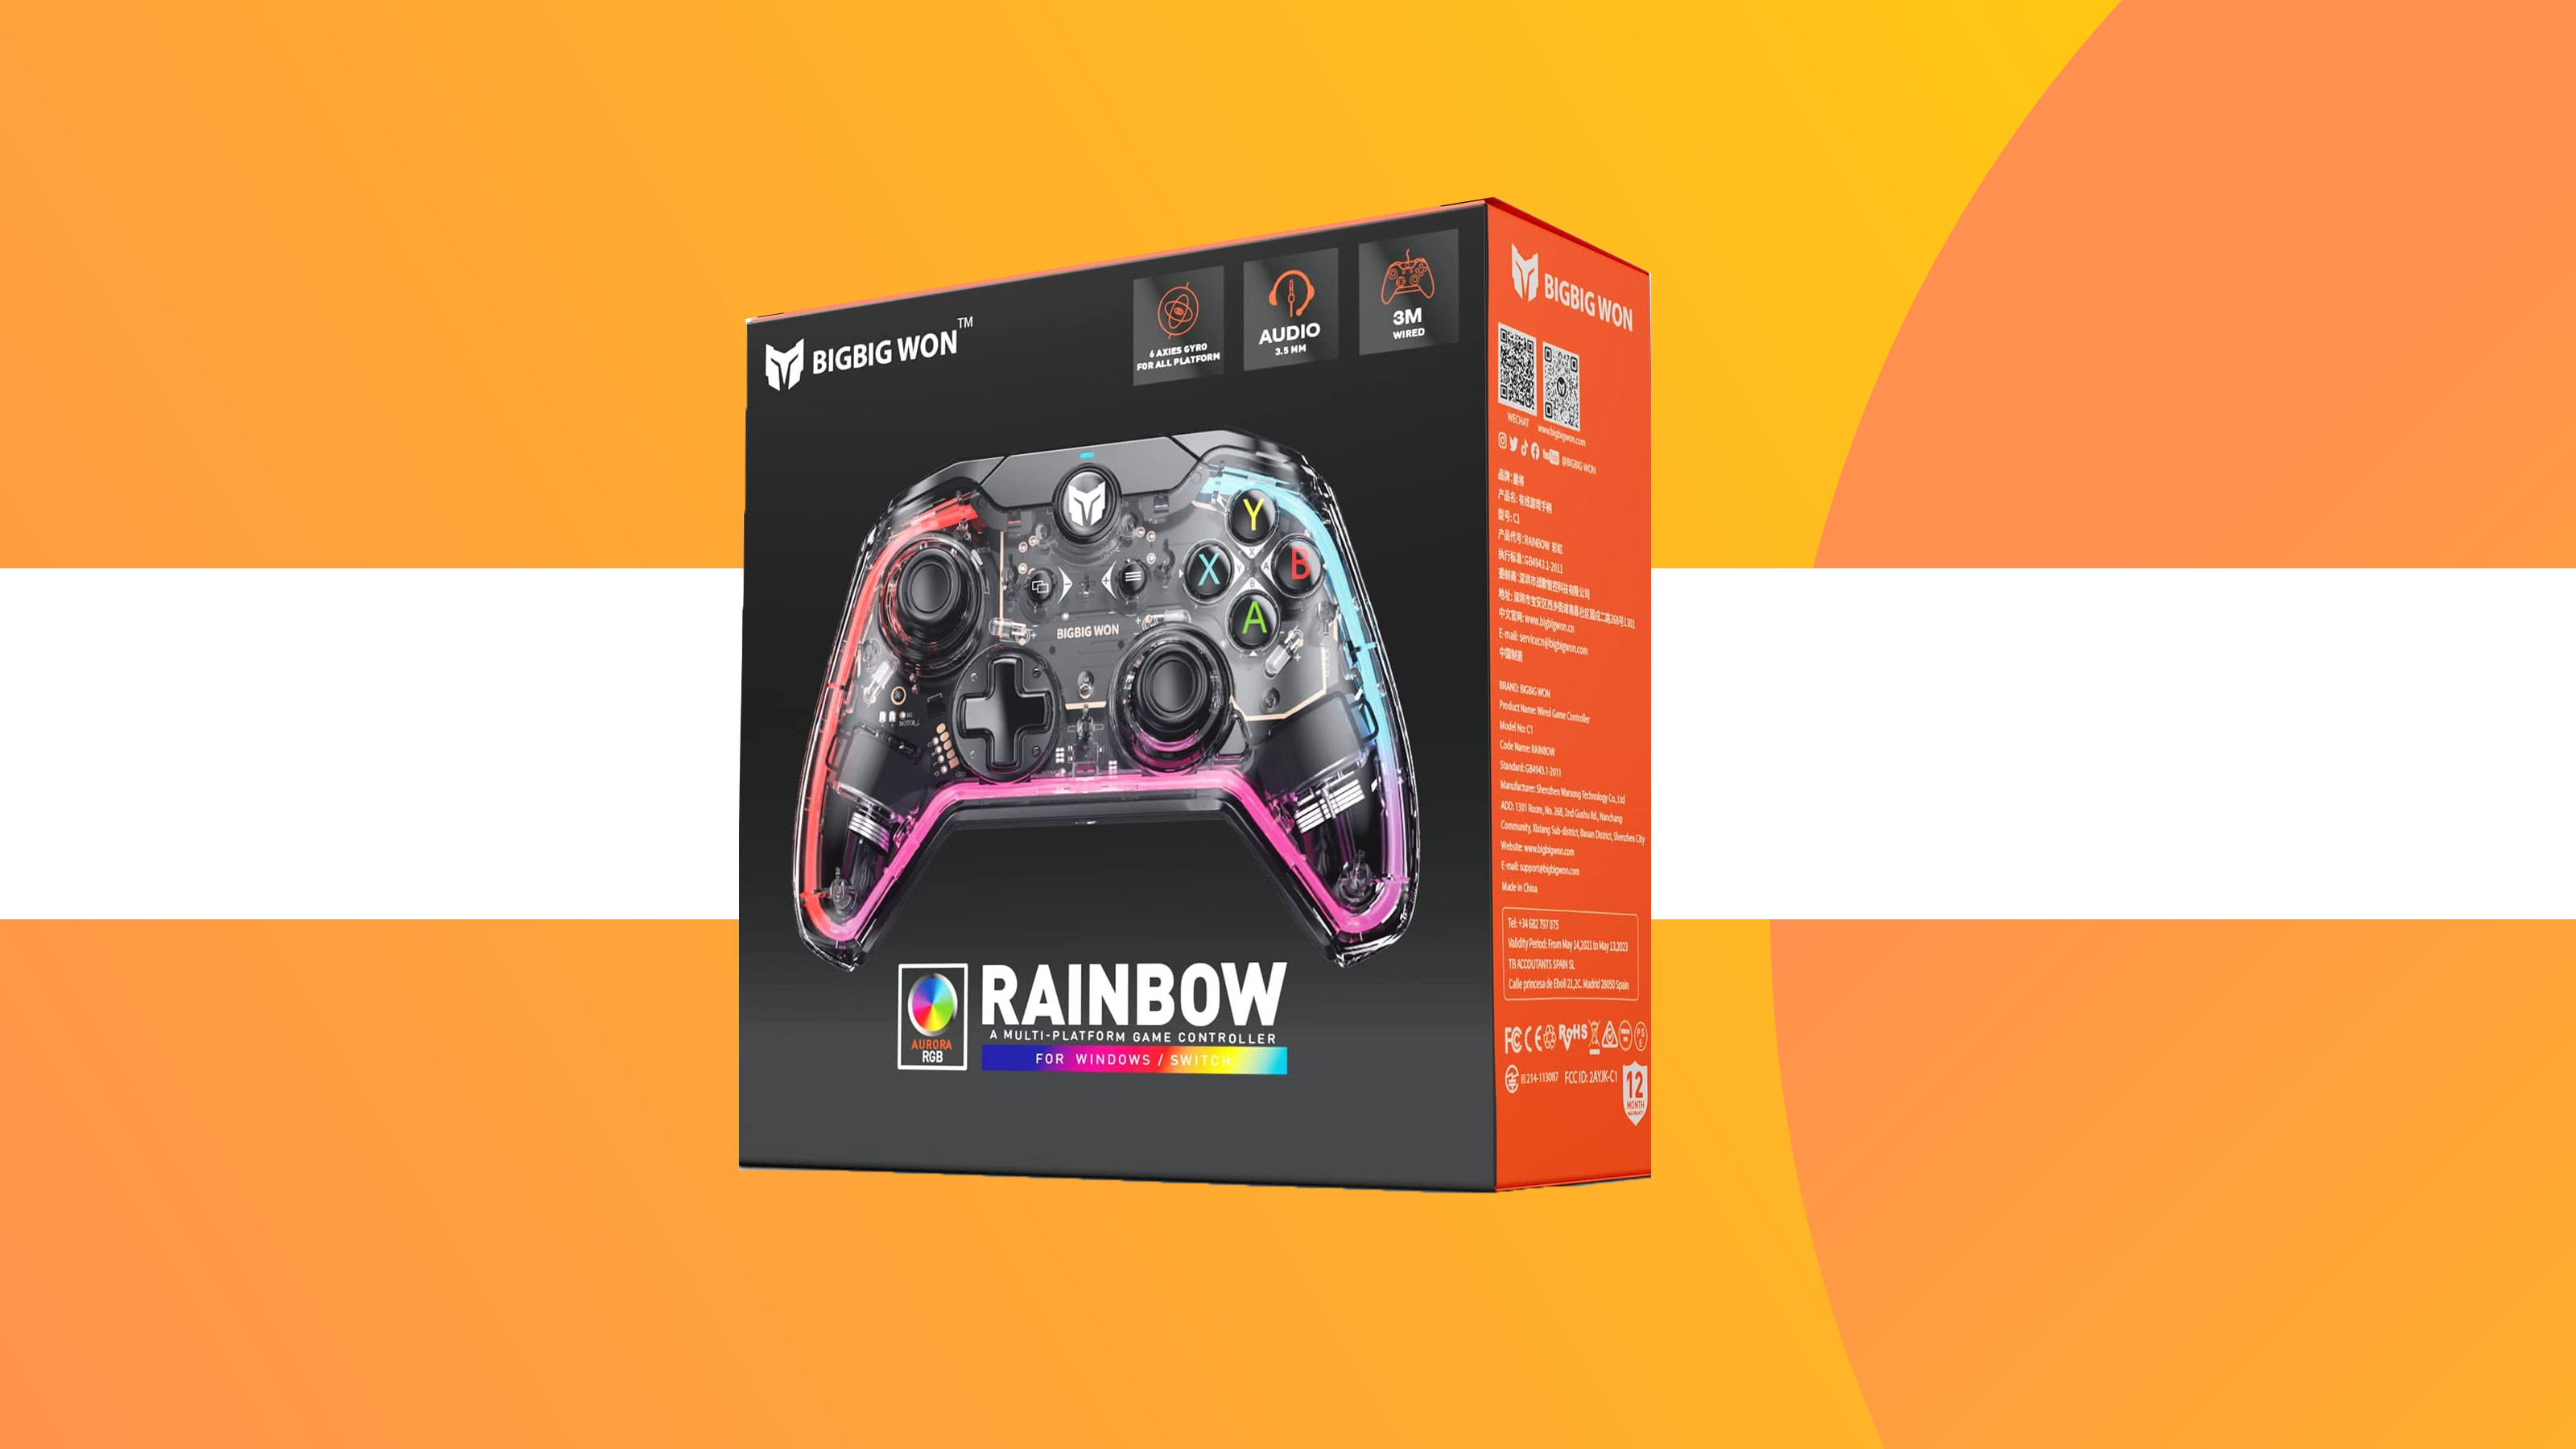 A product shot of the BIGBIG WON rainbow wired controller on a colourful background